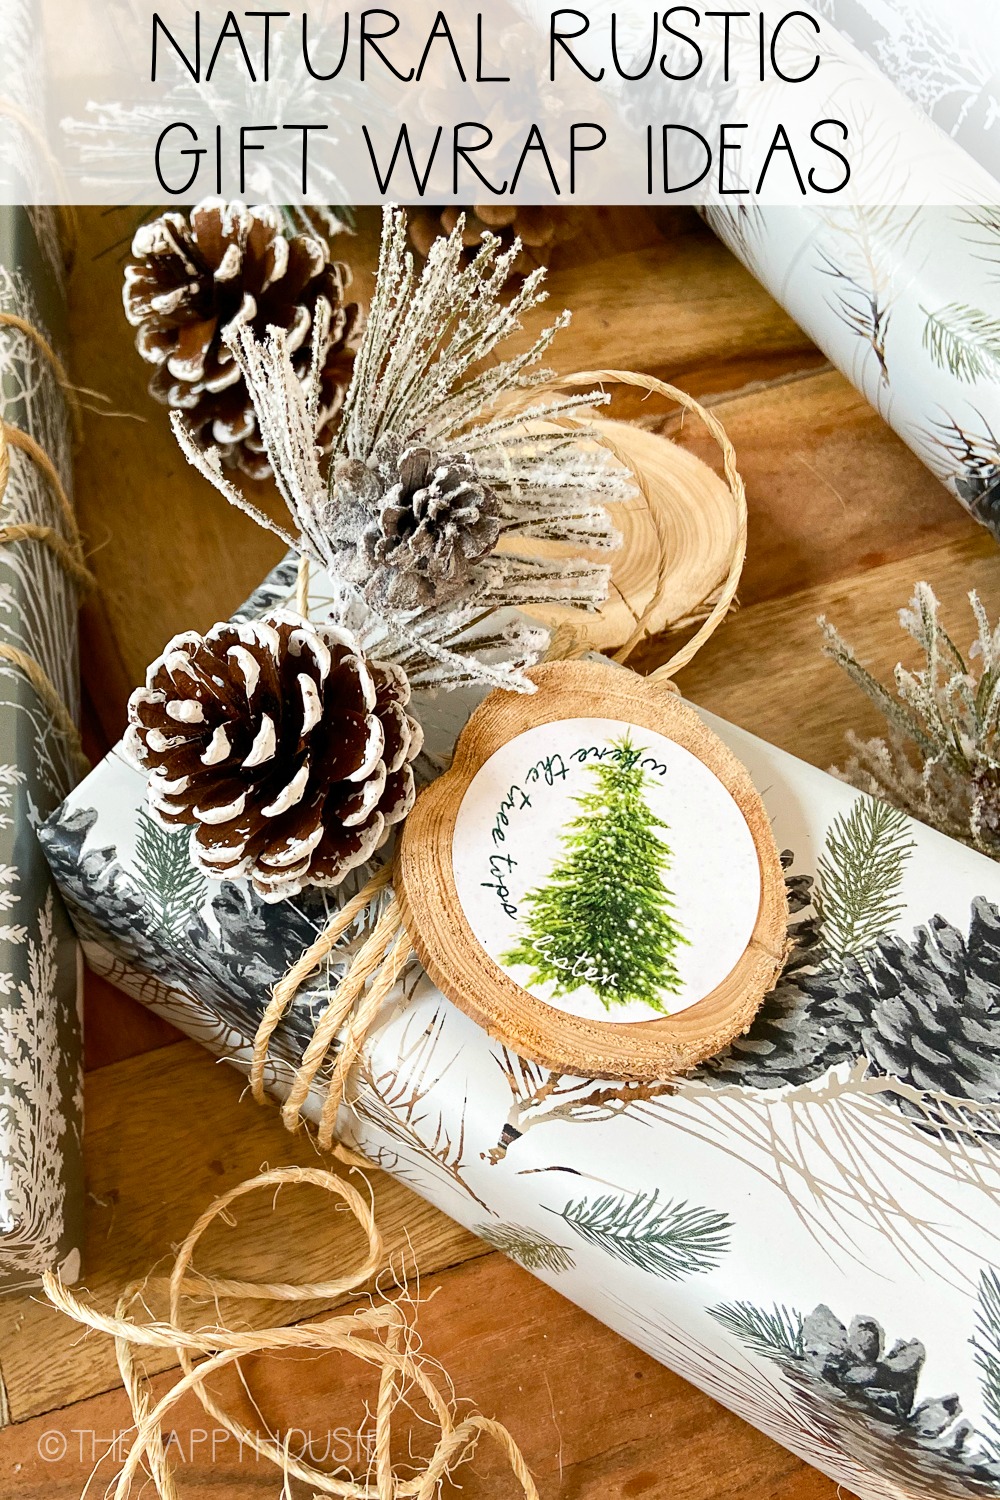 Natural Rustic Gift Wrap Ideas graphic.